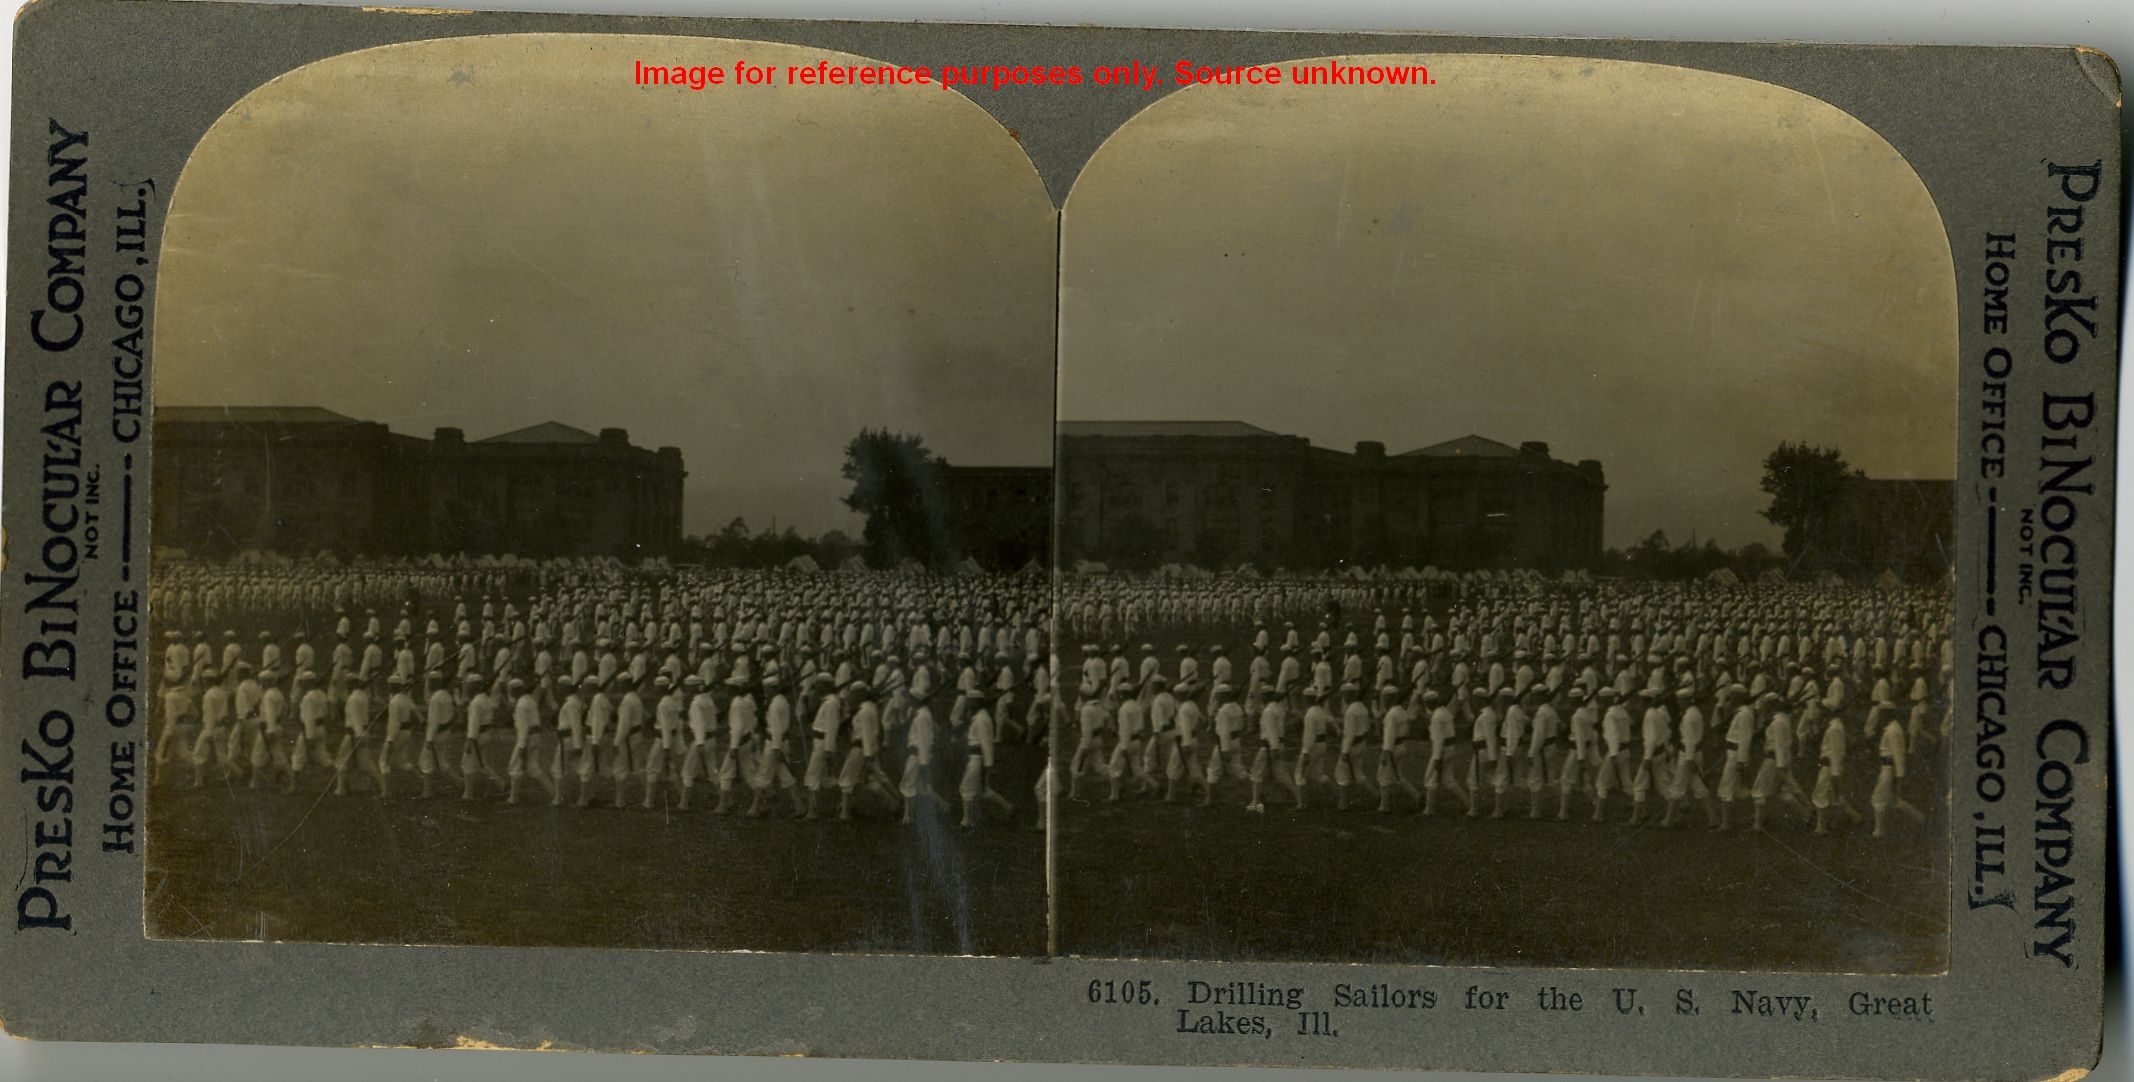 Drilling Sailors for the U. S. Navy, Great Lakes, Ill.